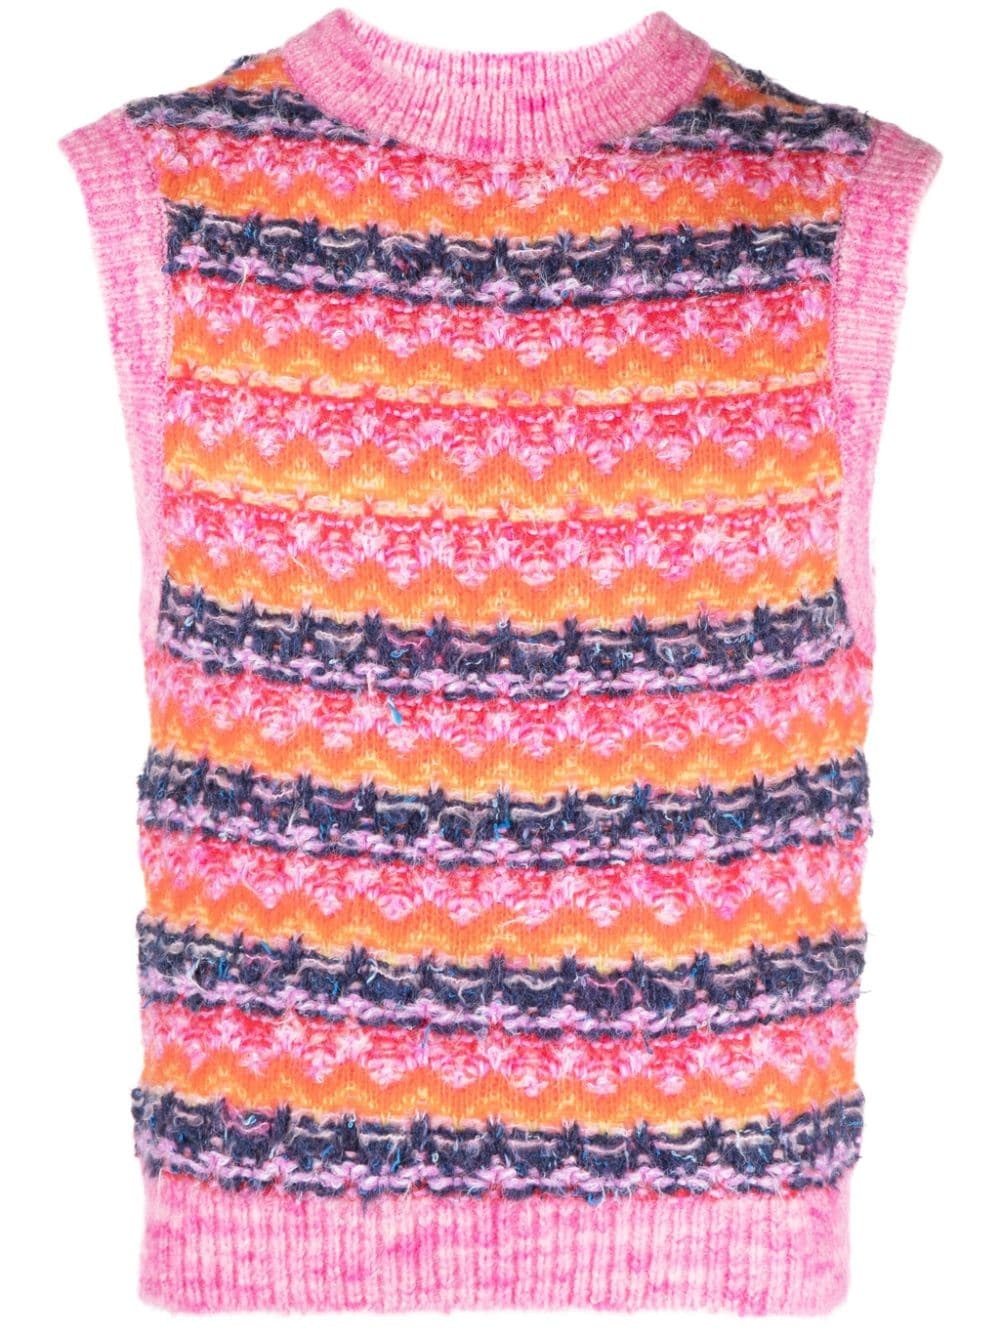 zigzag pattern-embroidered knitted top - 1